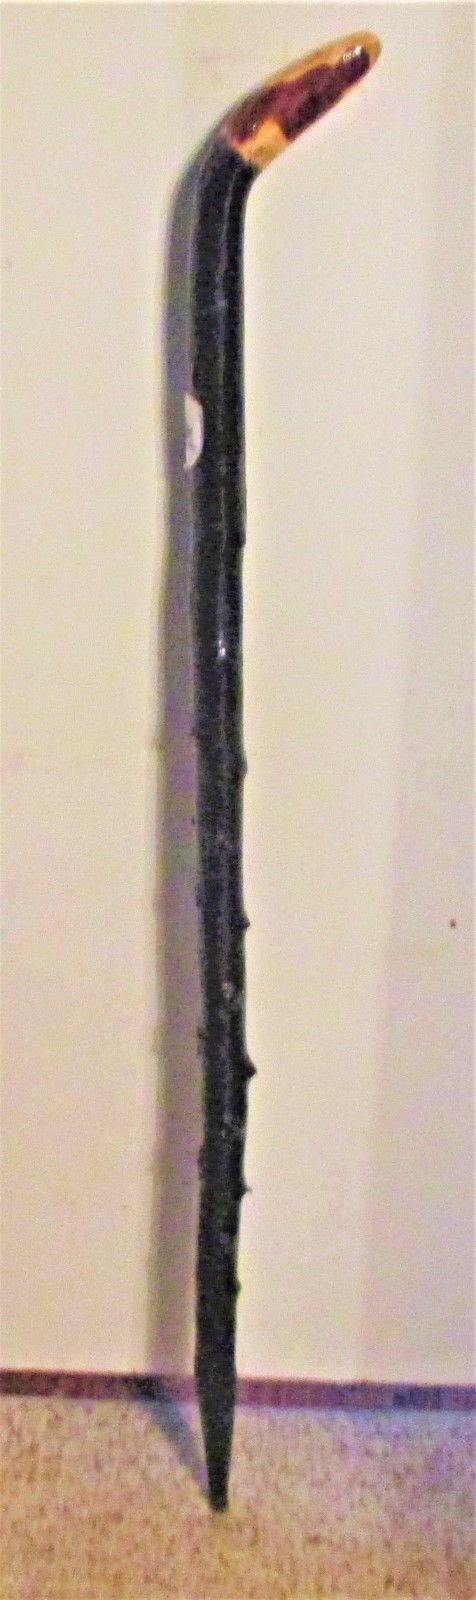 HARVESTED FROM THE FARM IN IRELAND IRISH SHILLELAGH BLACKTHIORN WALKING STICK